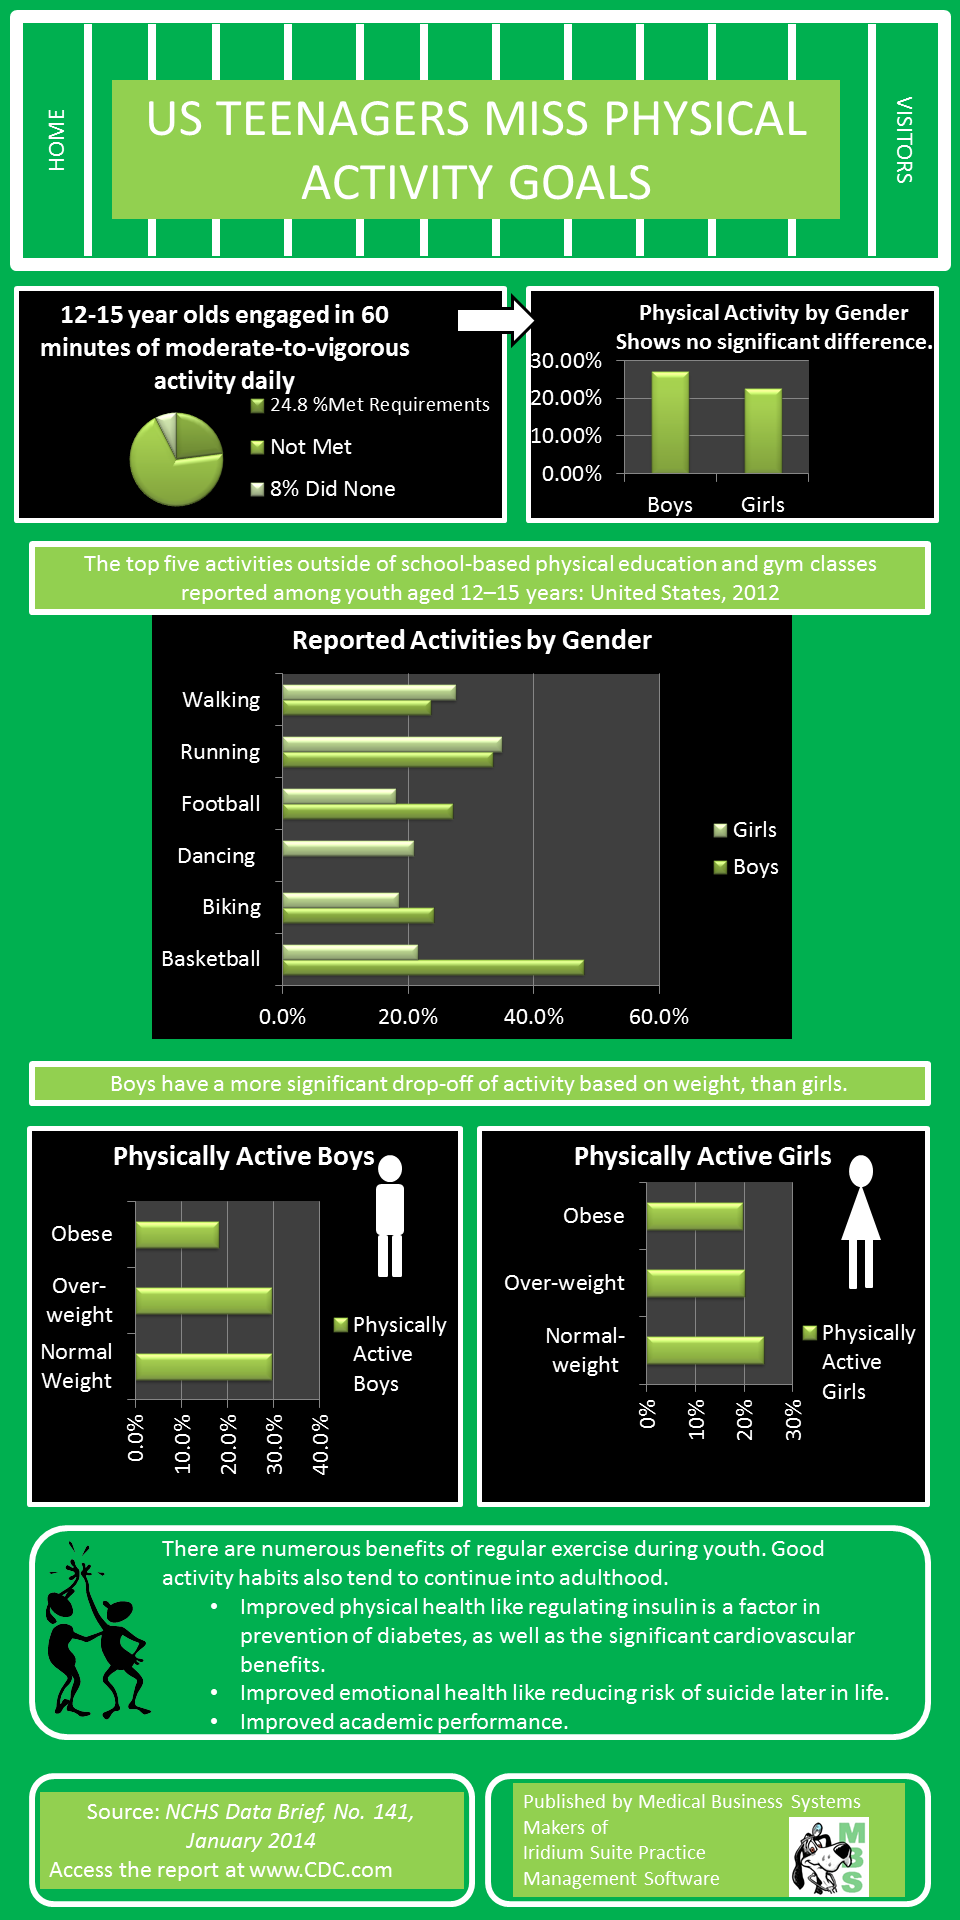 Activity Stats for US Teens